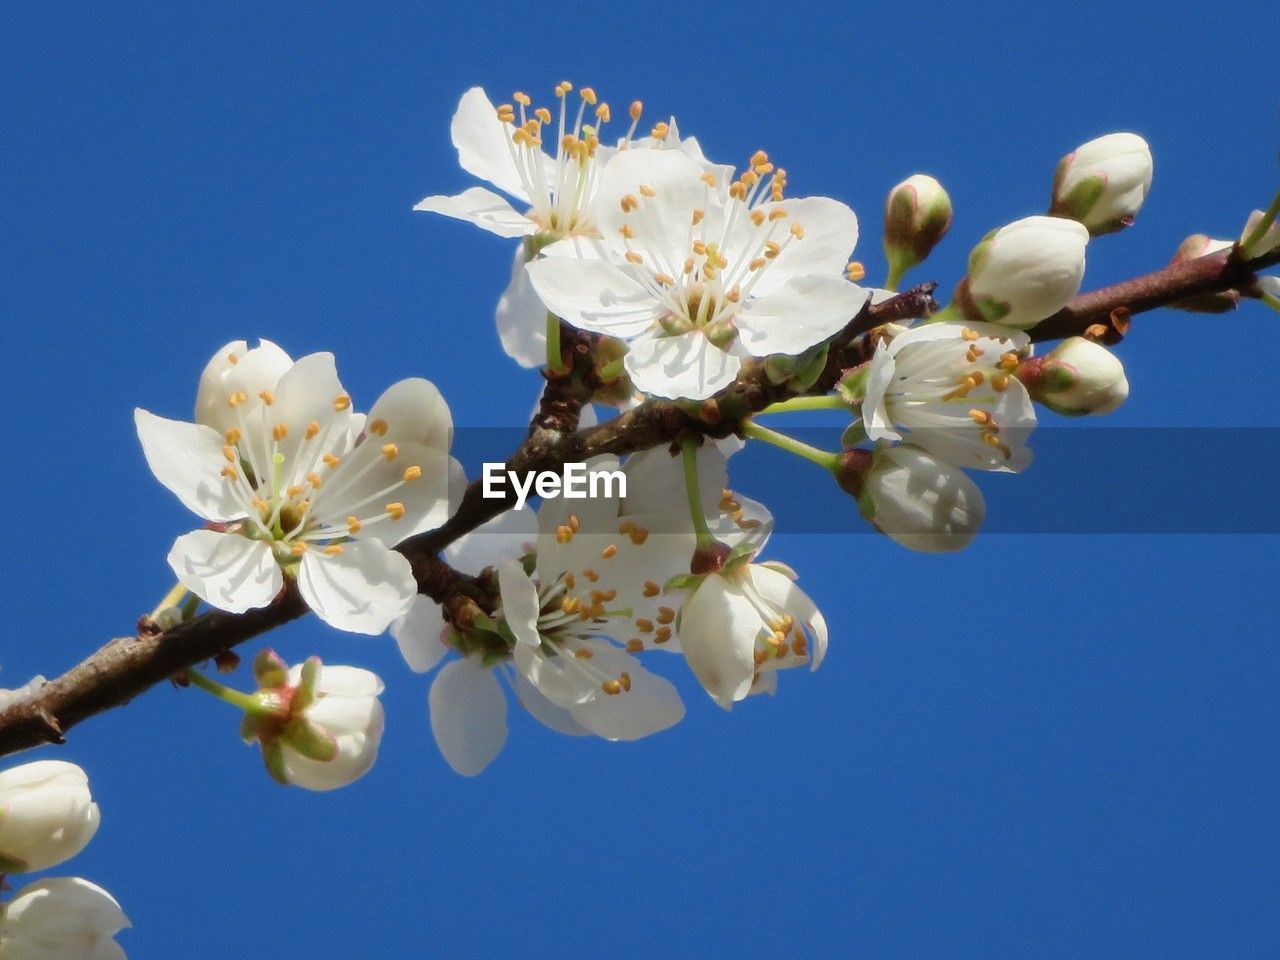 plant, flower, flowering plant, blossom, blue, fragility, sky, beauty in nature, freshness, clear sky, springtime, branch, nature, growth, white, tree, produce, low angle view, close-up, no people, flower head, inflorescence, petal, fruit, macro photography, food, day, spring, outdoors, fruit tree, twig, cherry blossom, sunny, apple tree, botany, sunlight, almond tree